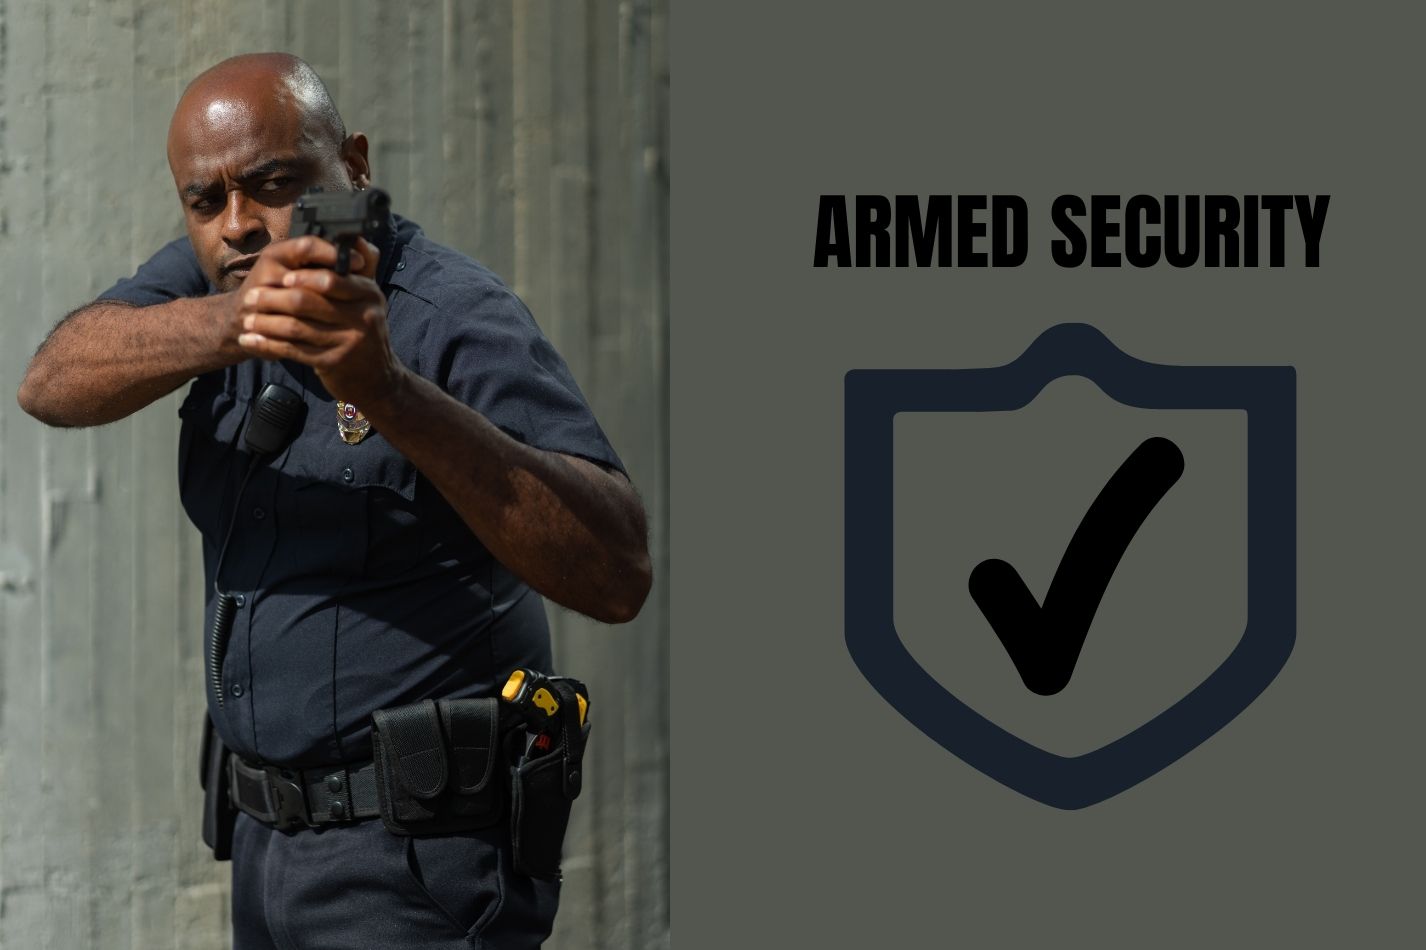 Armed security guard services